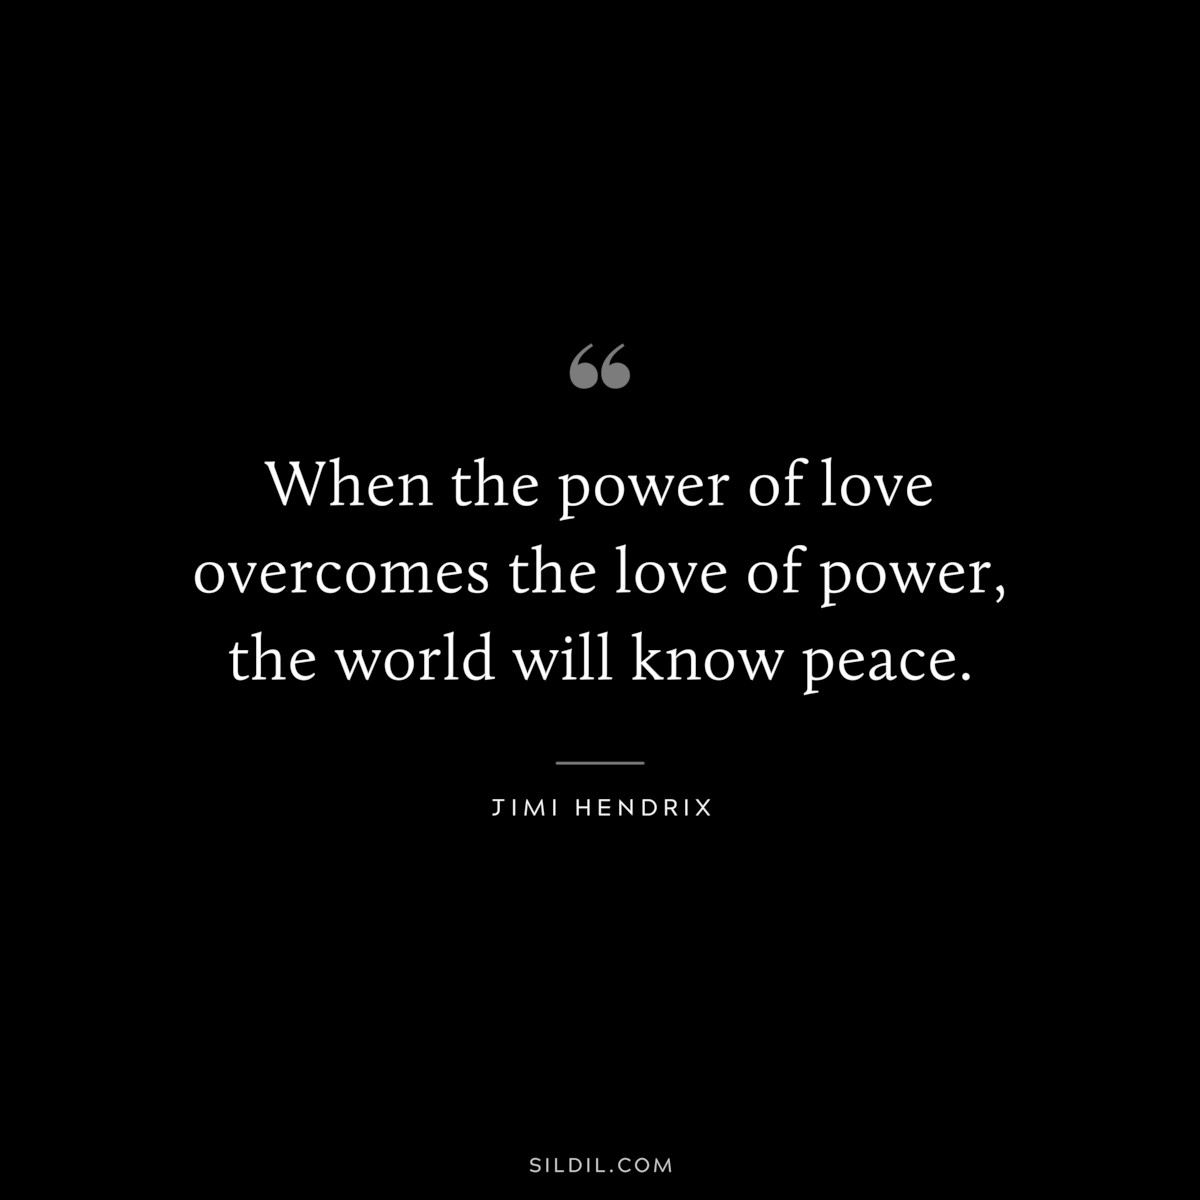 When the power of love overcomes the love of power, the world will know peace. ― Jimi Hendrix